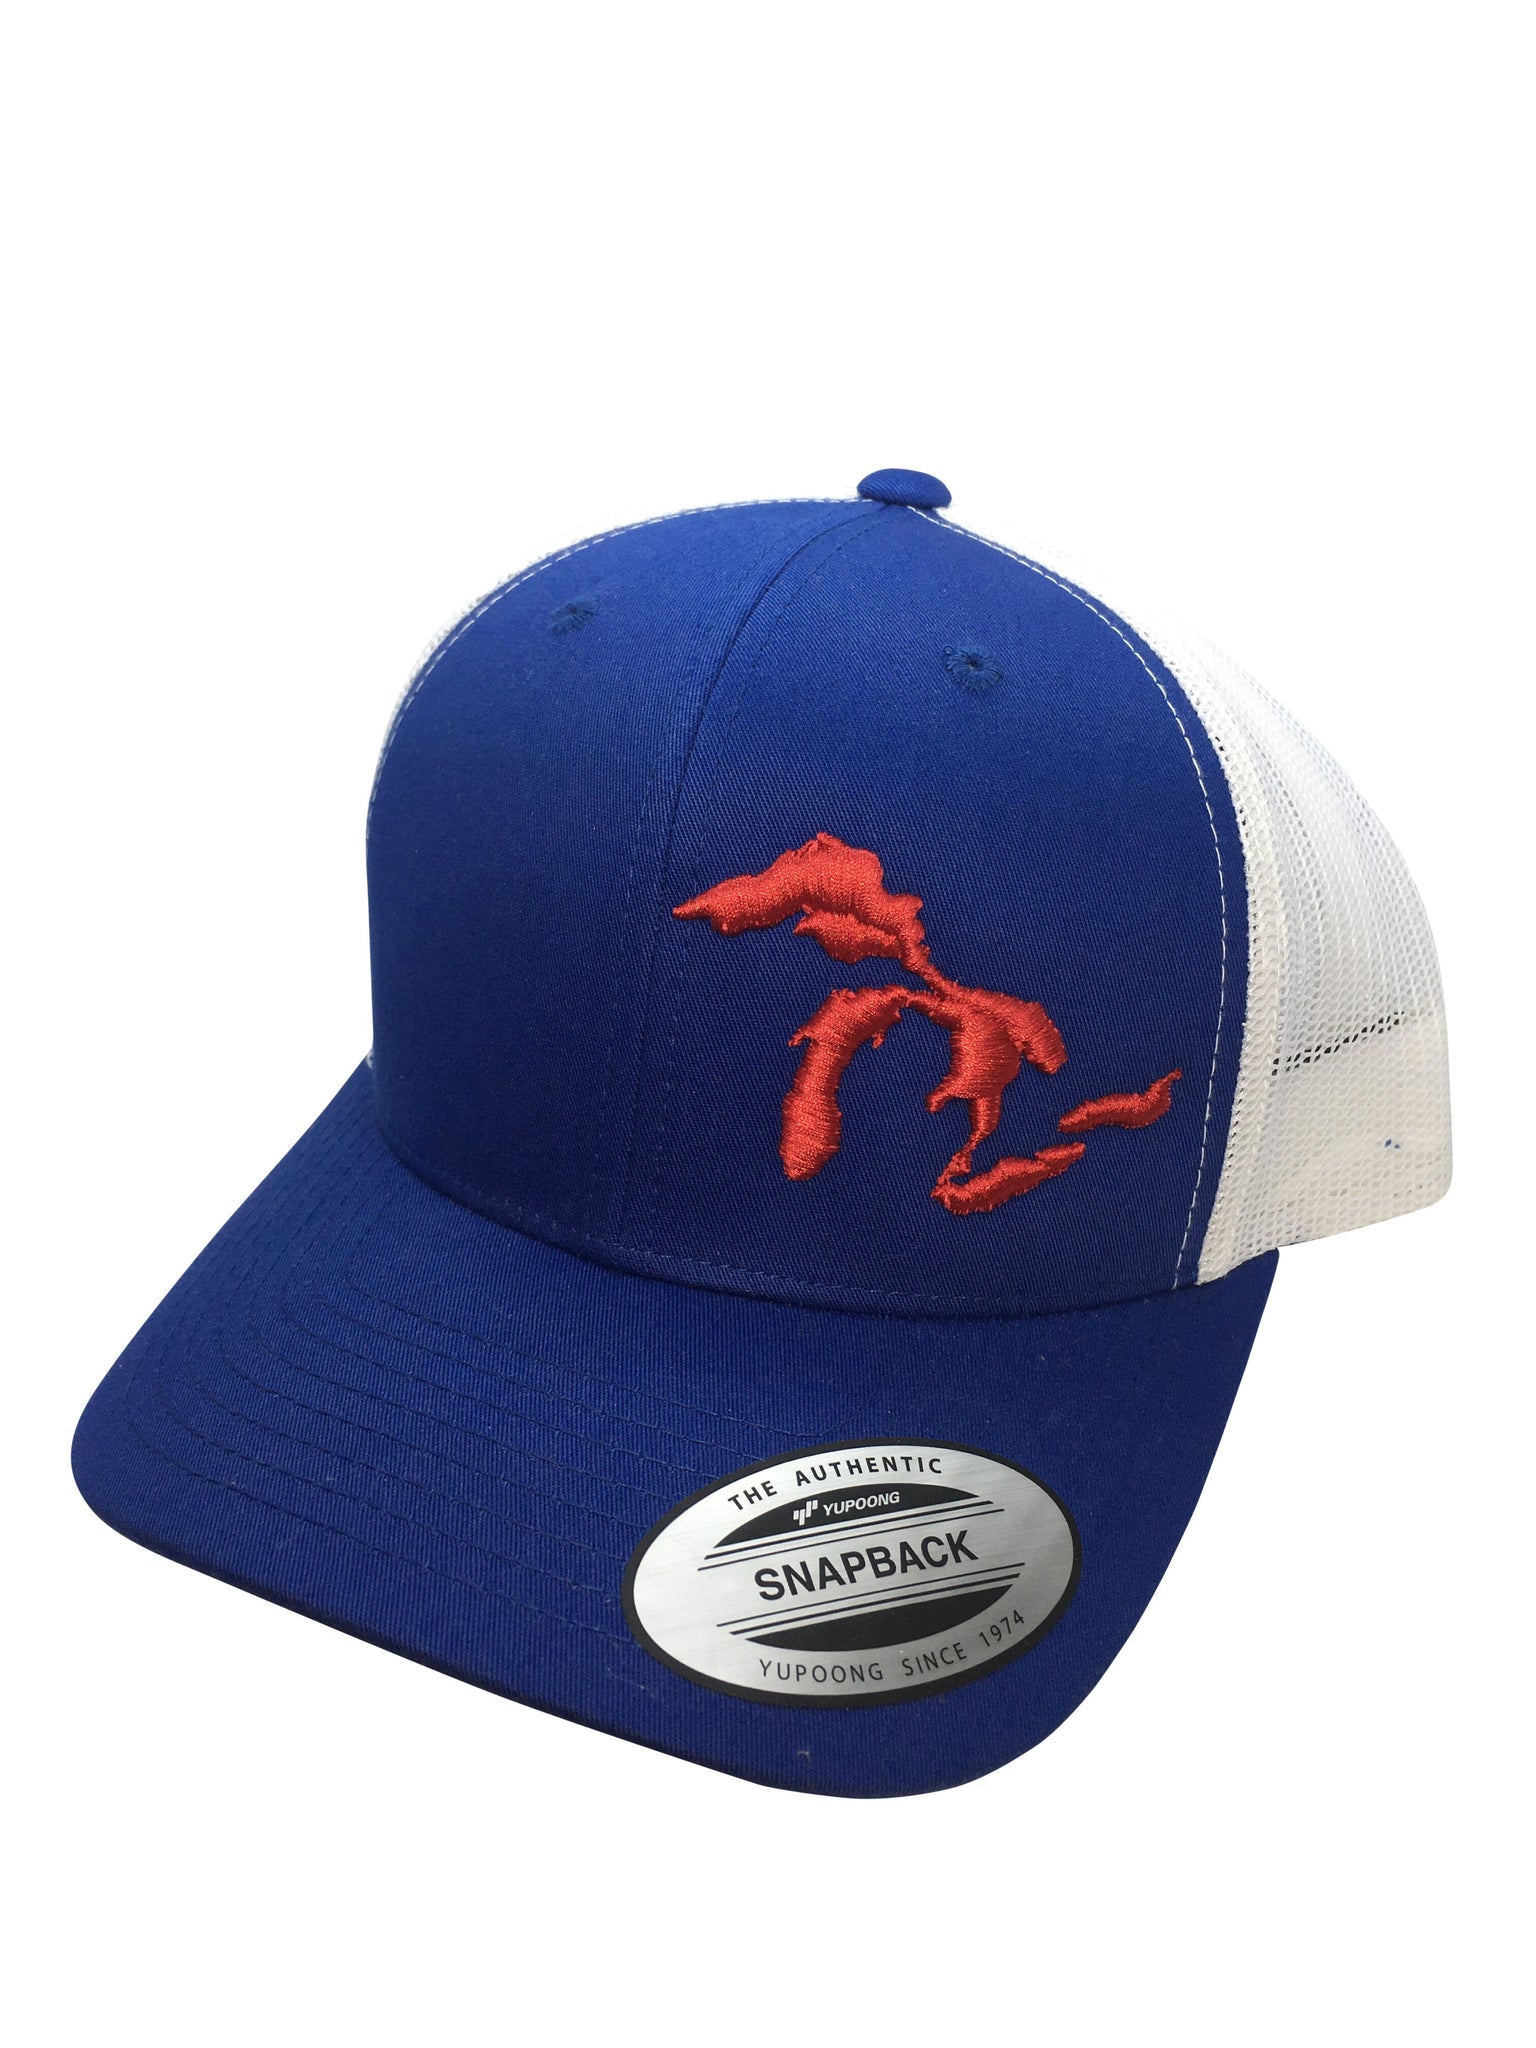 Great Lakes Trucker Hat - Red/White & Blue